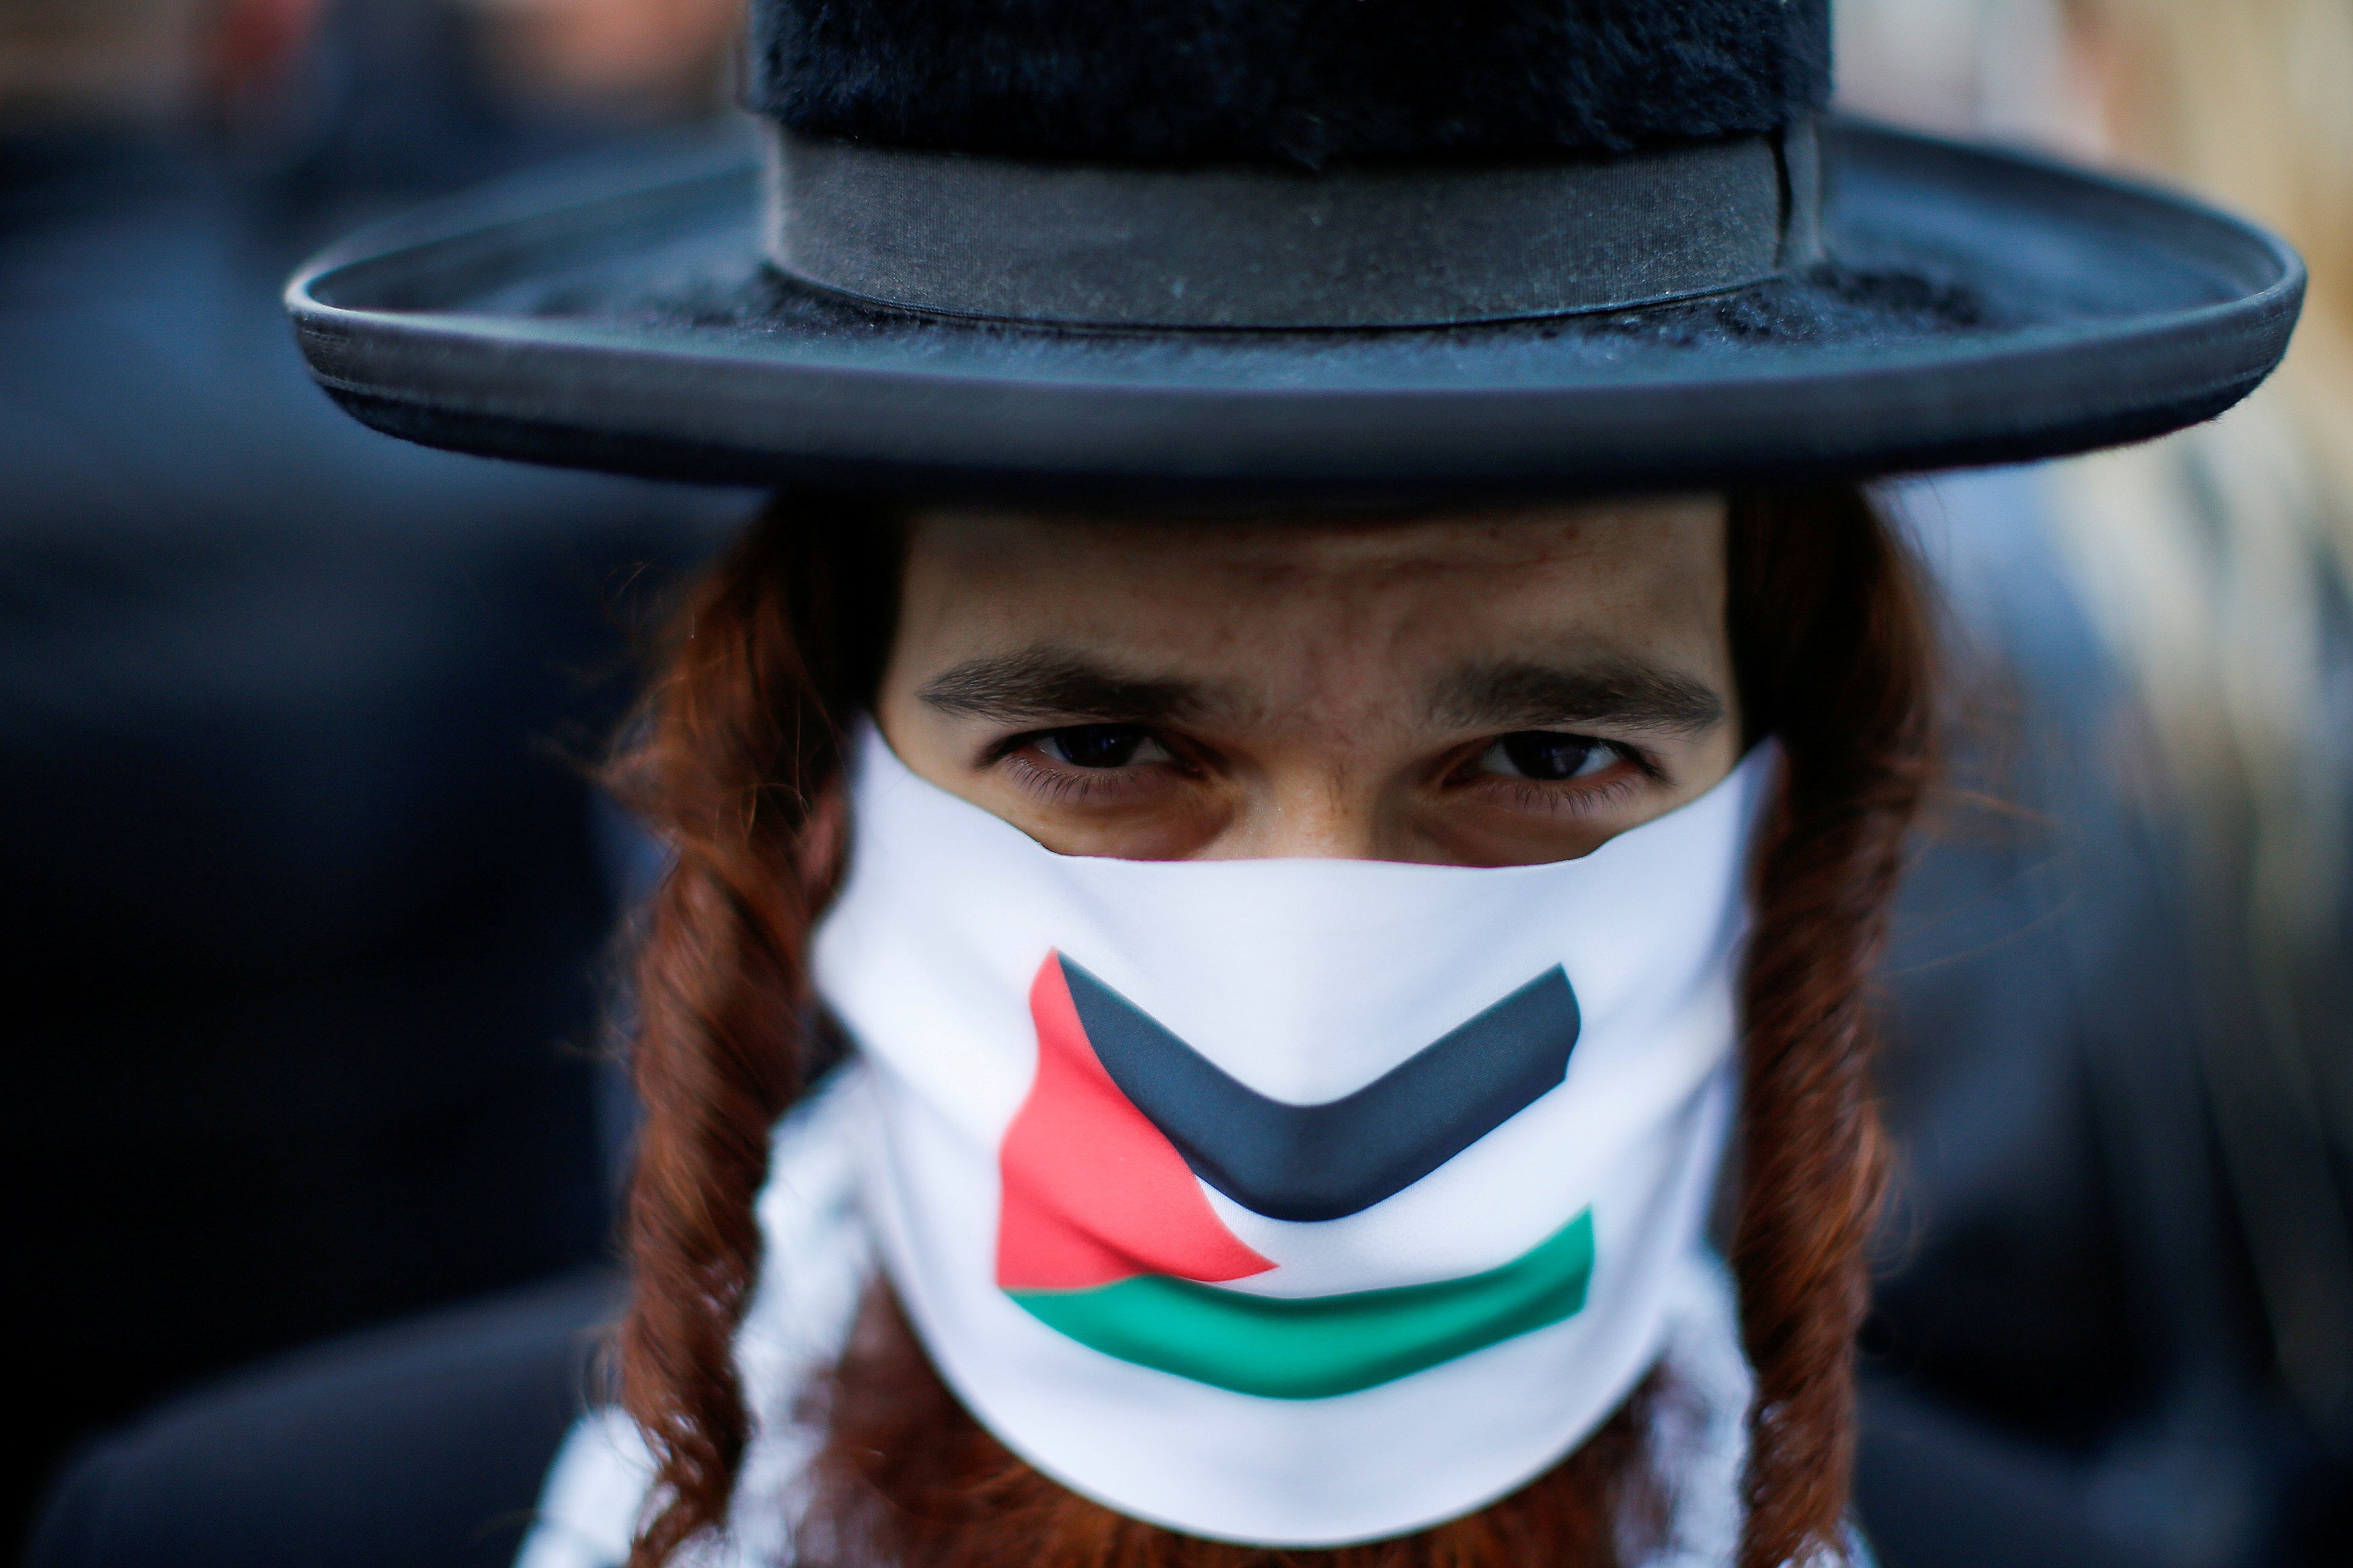 A pro-Palestinian Jewish Orthodox wears a face mask during a protest near the Israeli Consulate following a flare-up of Israeli-Palestinian violence in Manhattan